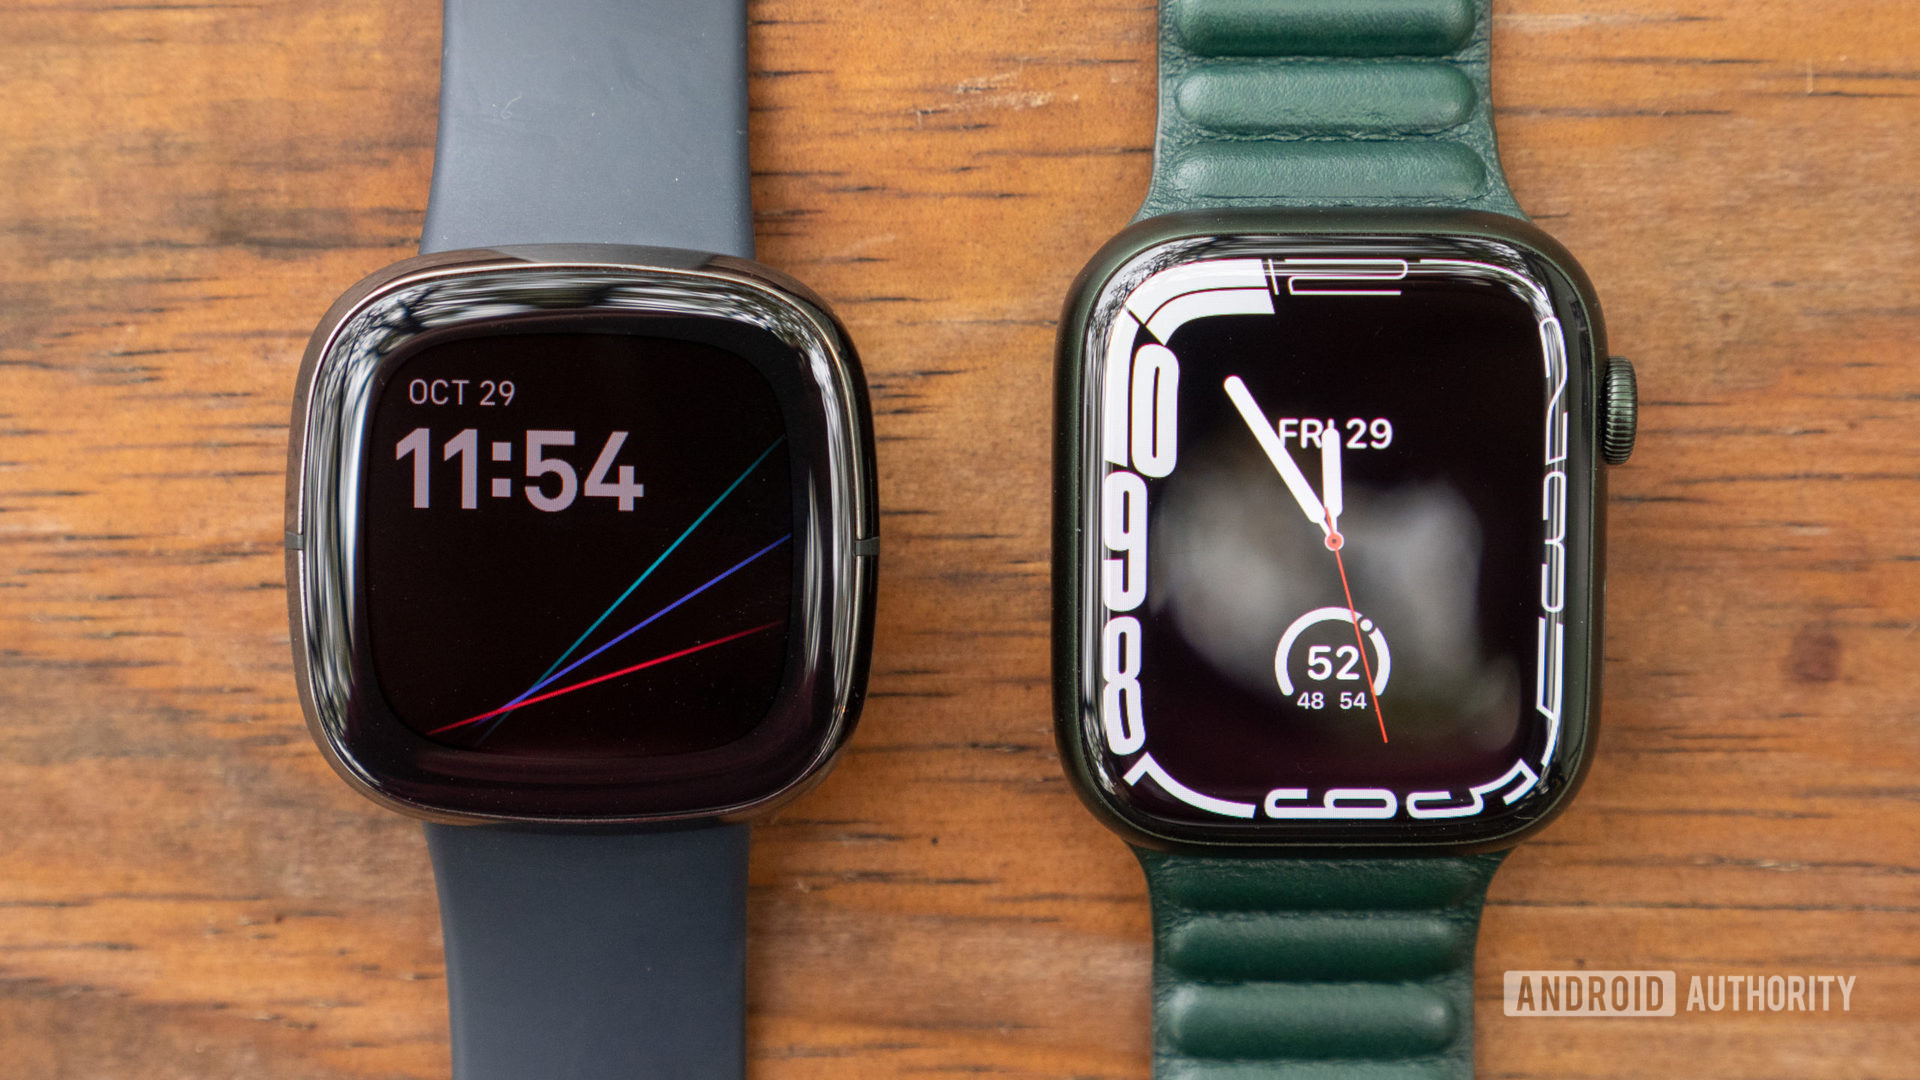 An image of the Apple Watch Series 7 vs the Fitbit Sense